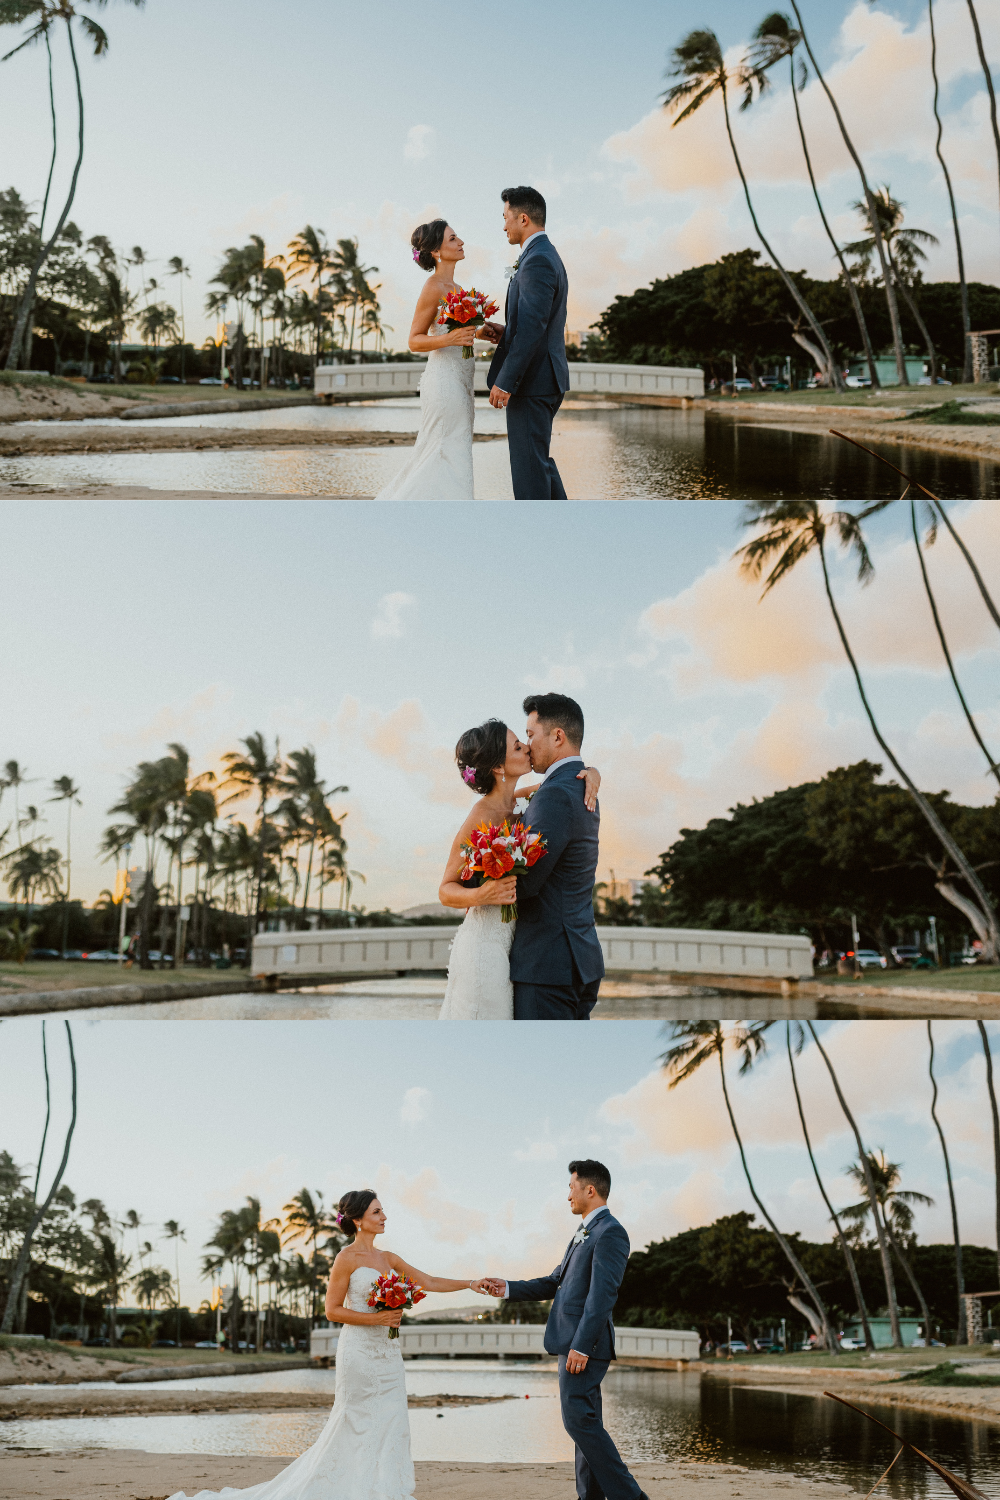 Collage of bride and groom standing on the beach in front of a bridge at sunset with palm trees around while the couple kisses at sunset as the bride holds here brightly colored Hawaii wedding bouquet | Oahu Wedding Photographer, Oahu Elopement Photographer, Destination Wedding Photographer, Destination Elopement Photographer, Newlywed moments ideas, Newlywed Photography inspiration, Hawaii Elopement ideas | chelseaabril.com